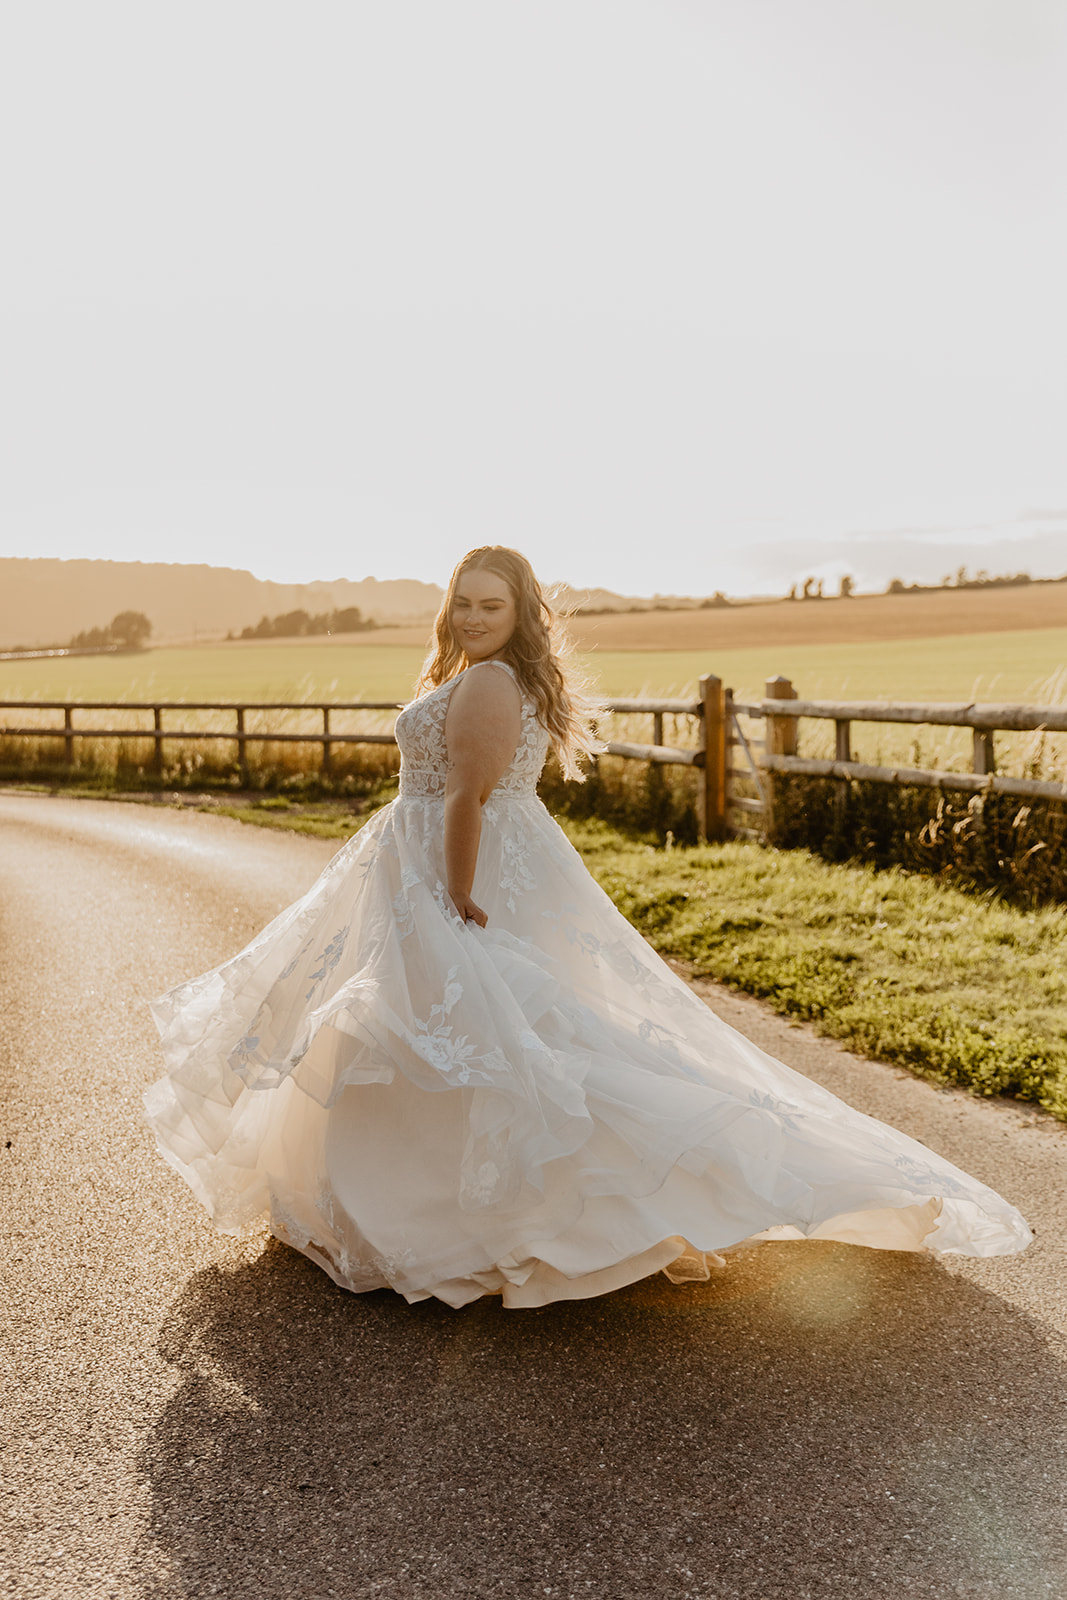 Bride at a Long Furlong Barn Wedding in Worthing, Sussex. By Olive Joy Photography.